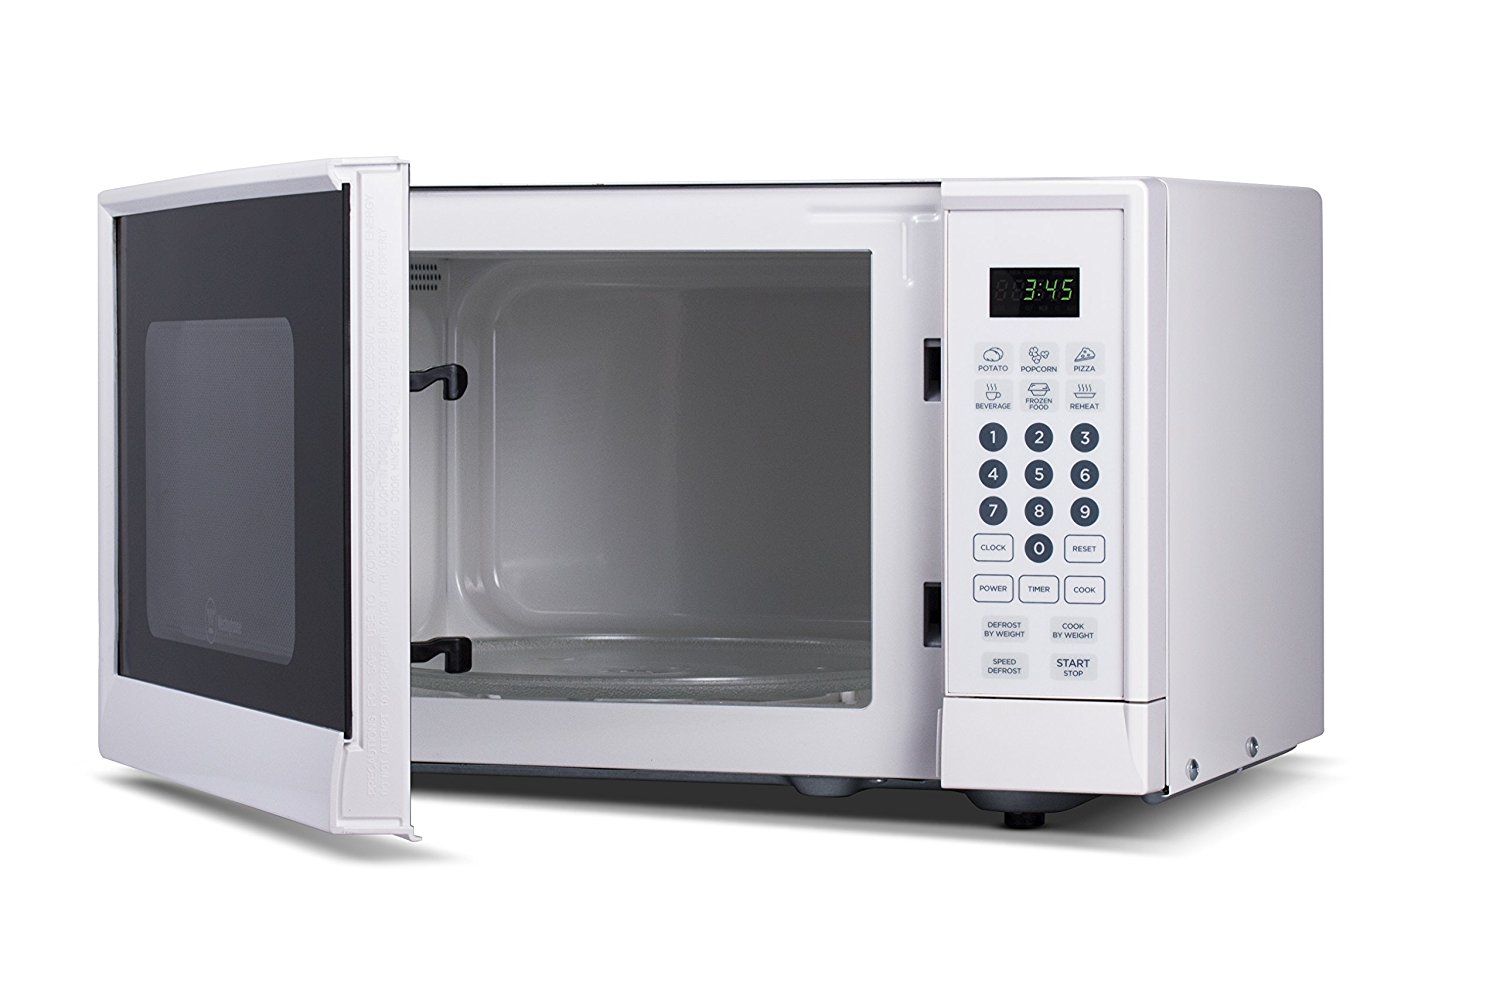 Westinghouse WCM990W 900 Watt Counter Top Microwave Oven, 0.9 Cubic Feet, White Cabinet